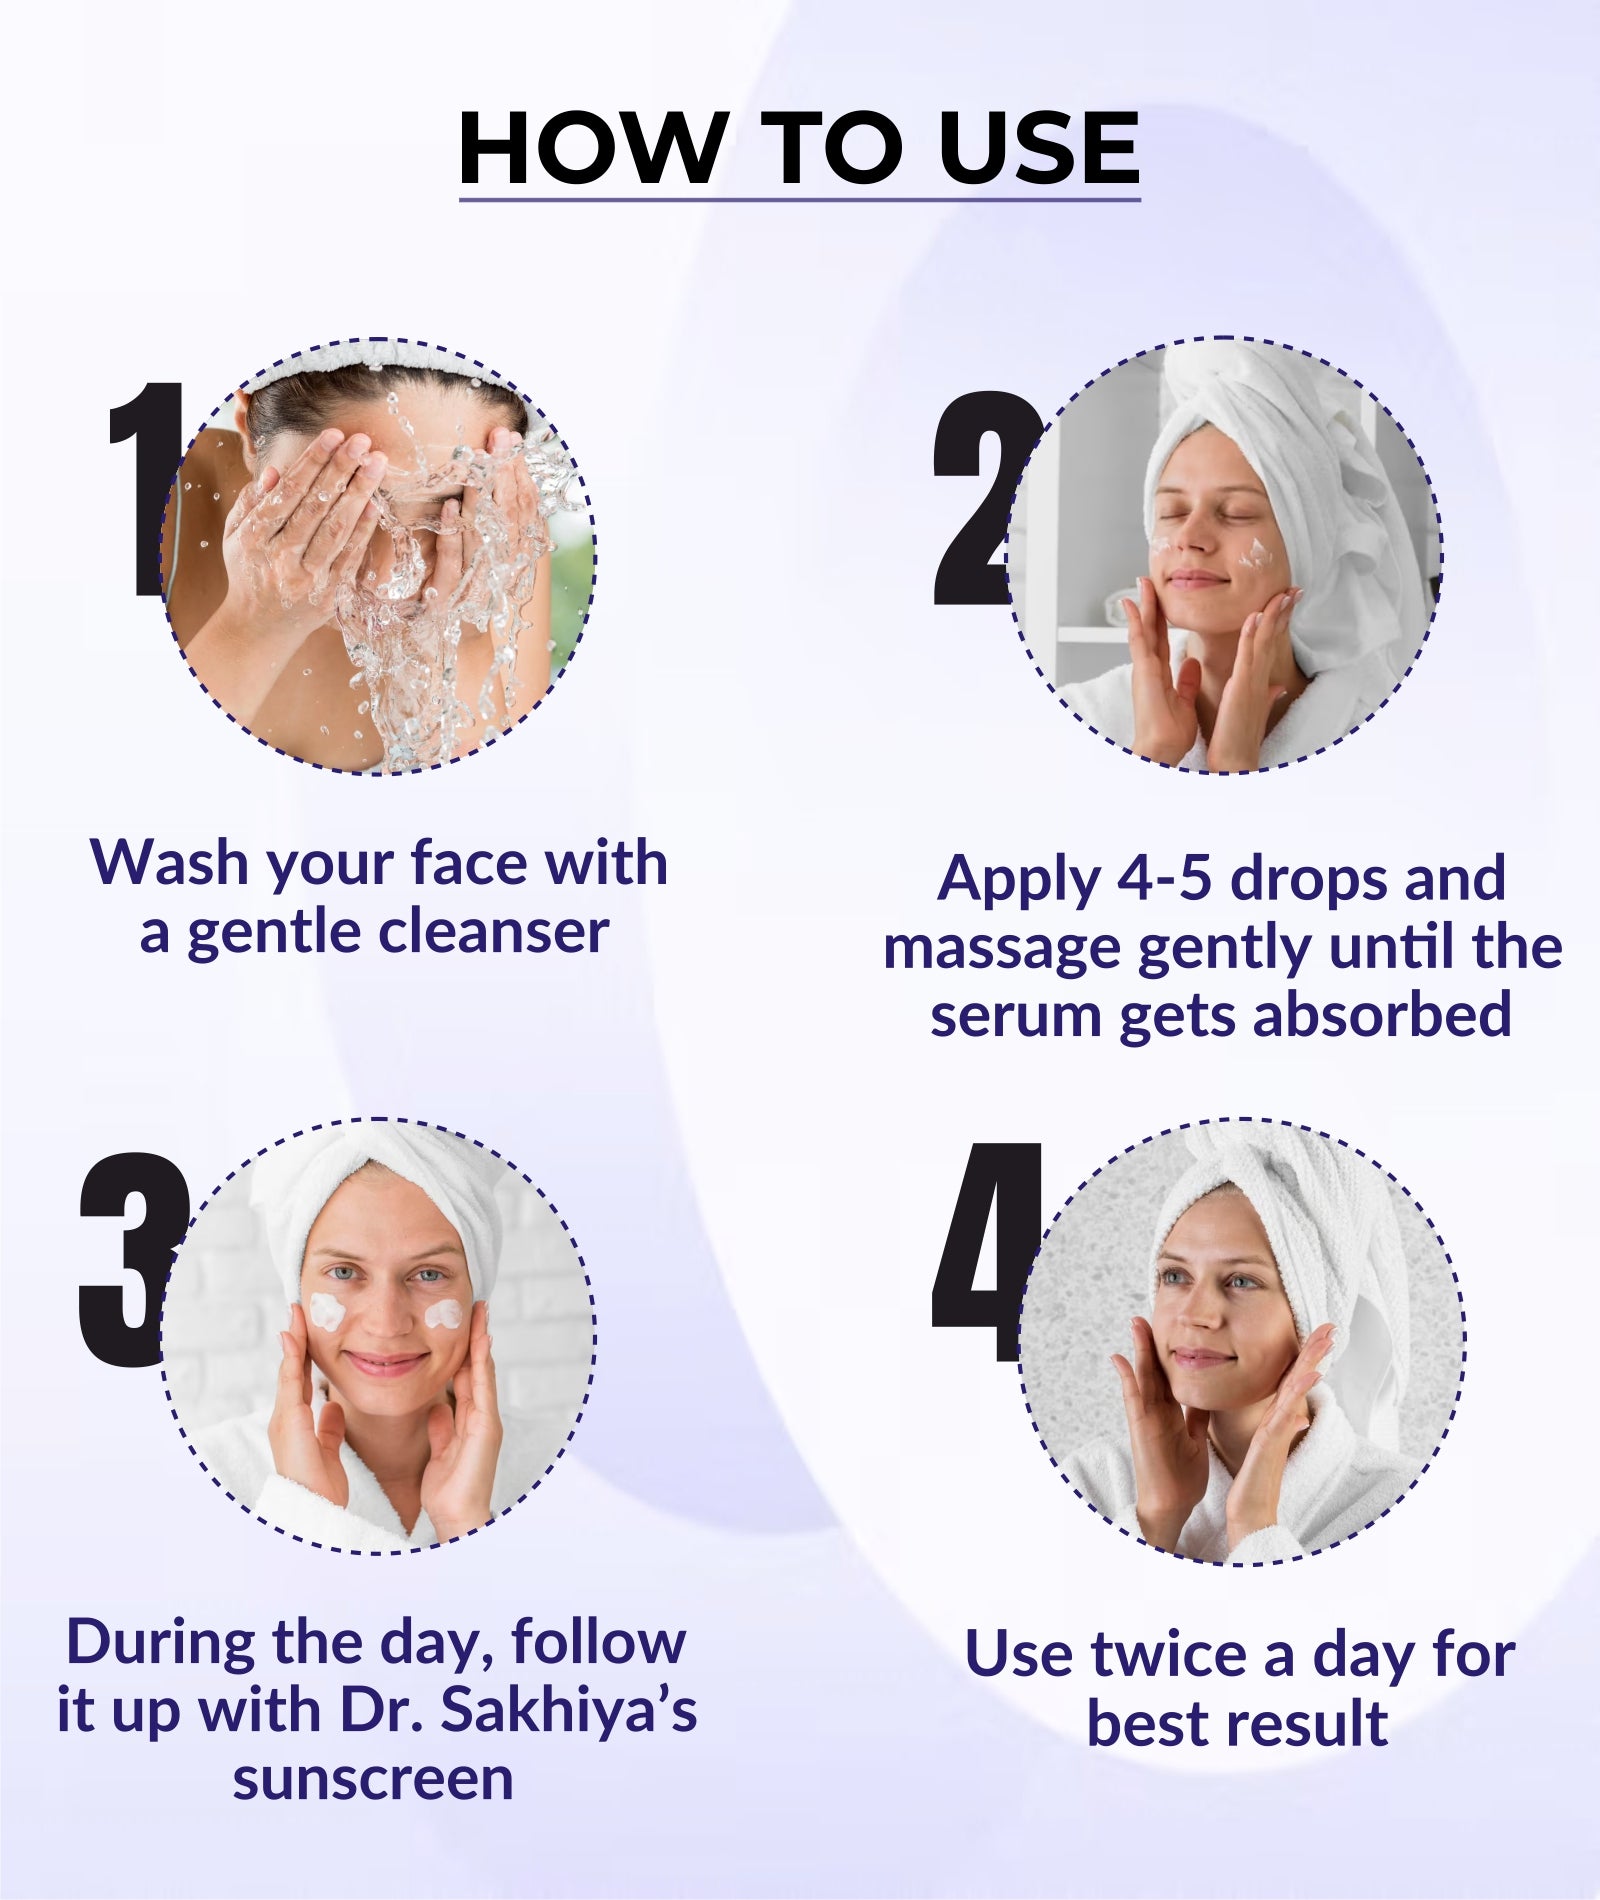 Steps Showing How to Use This Retinol Face Serum